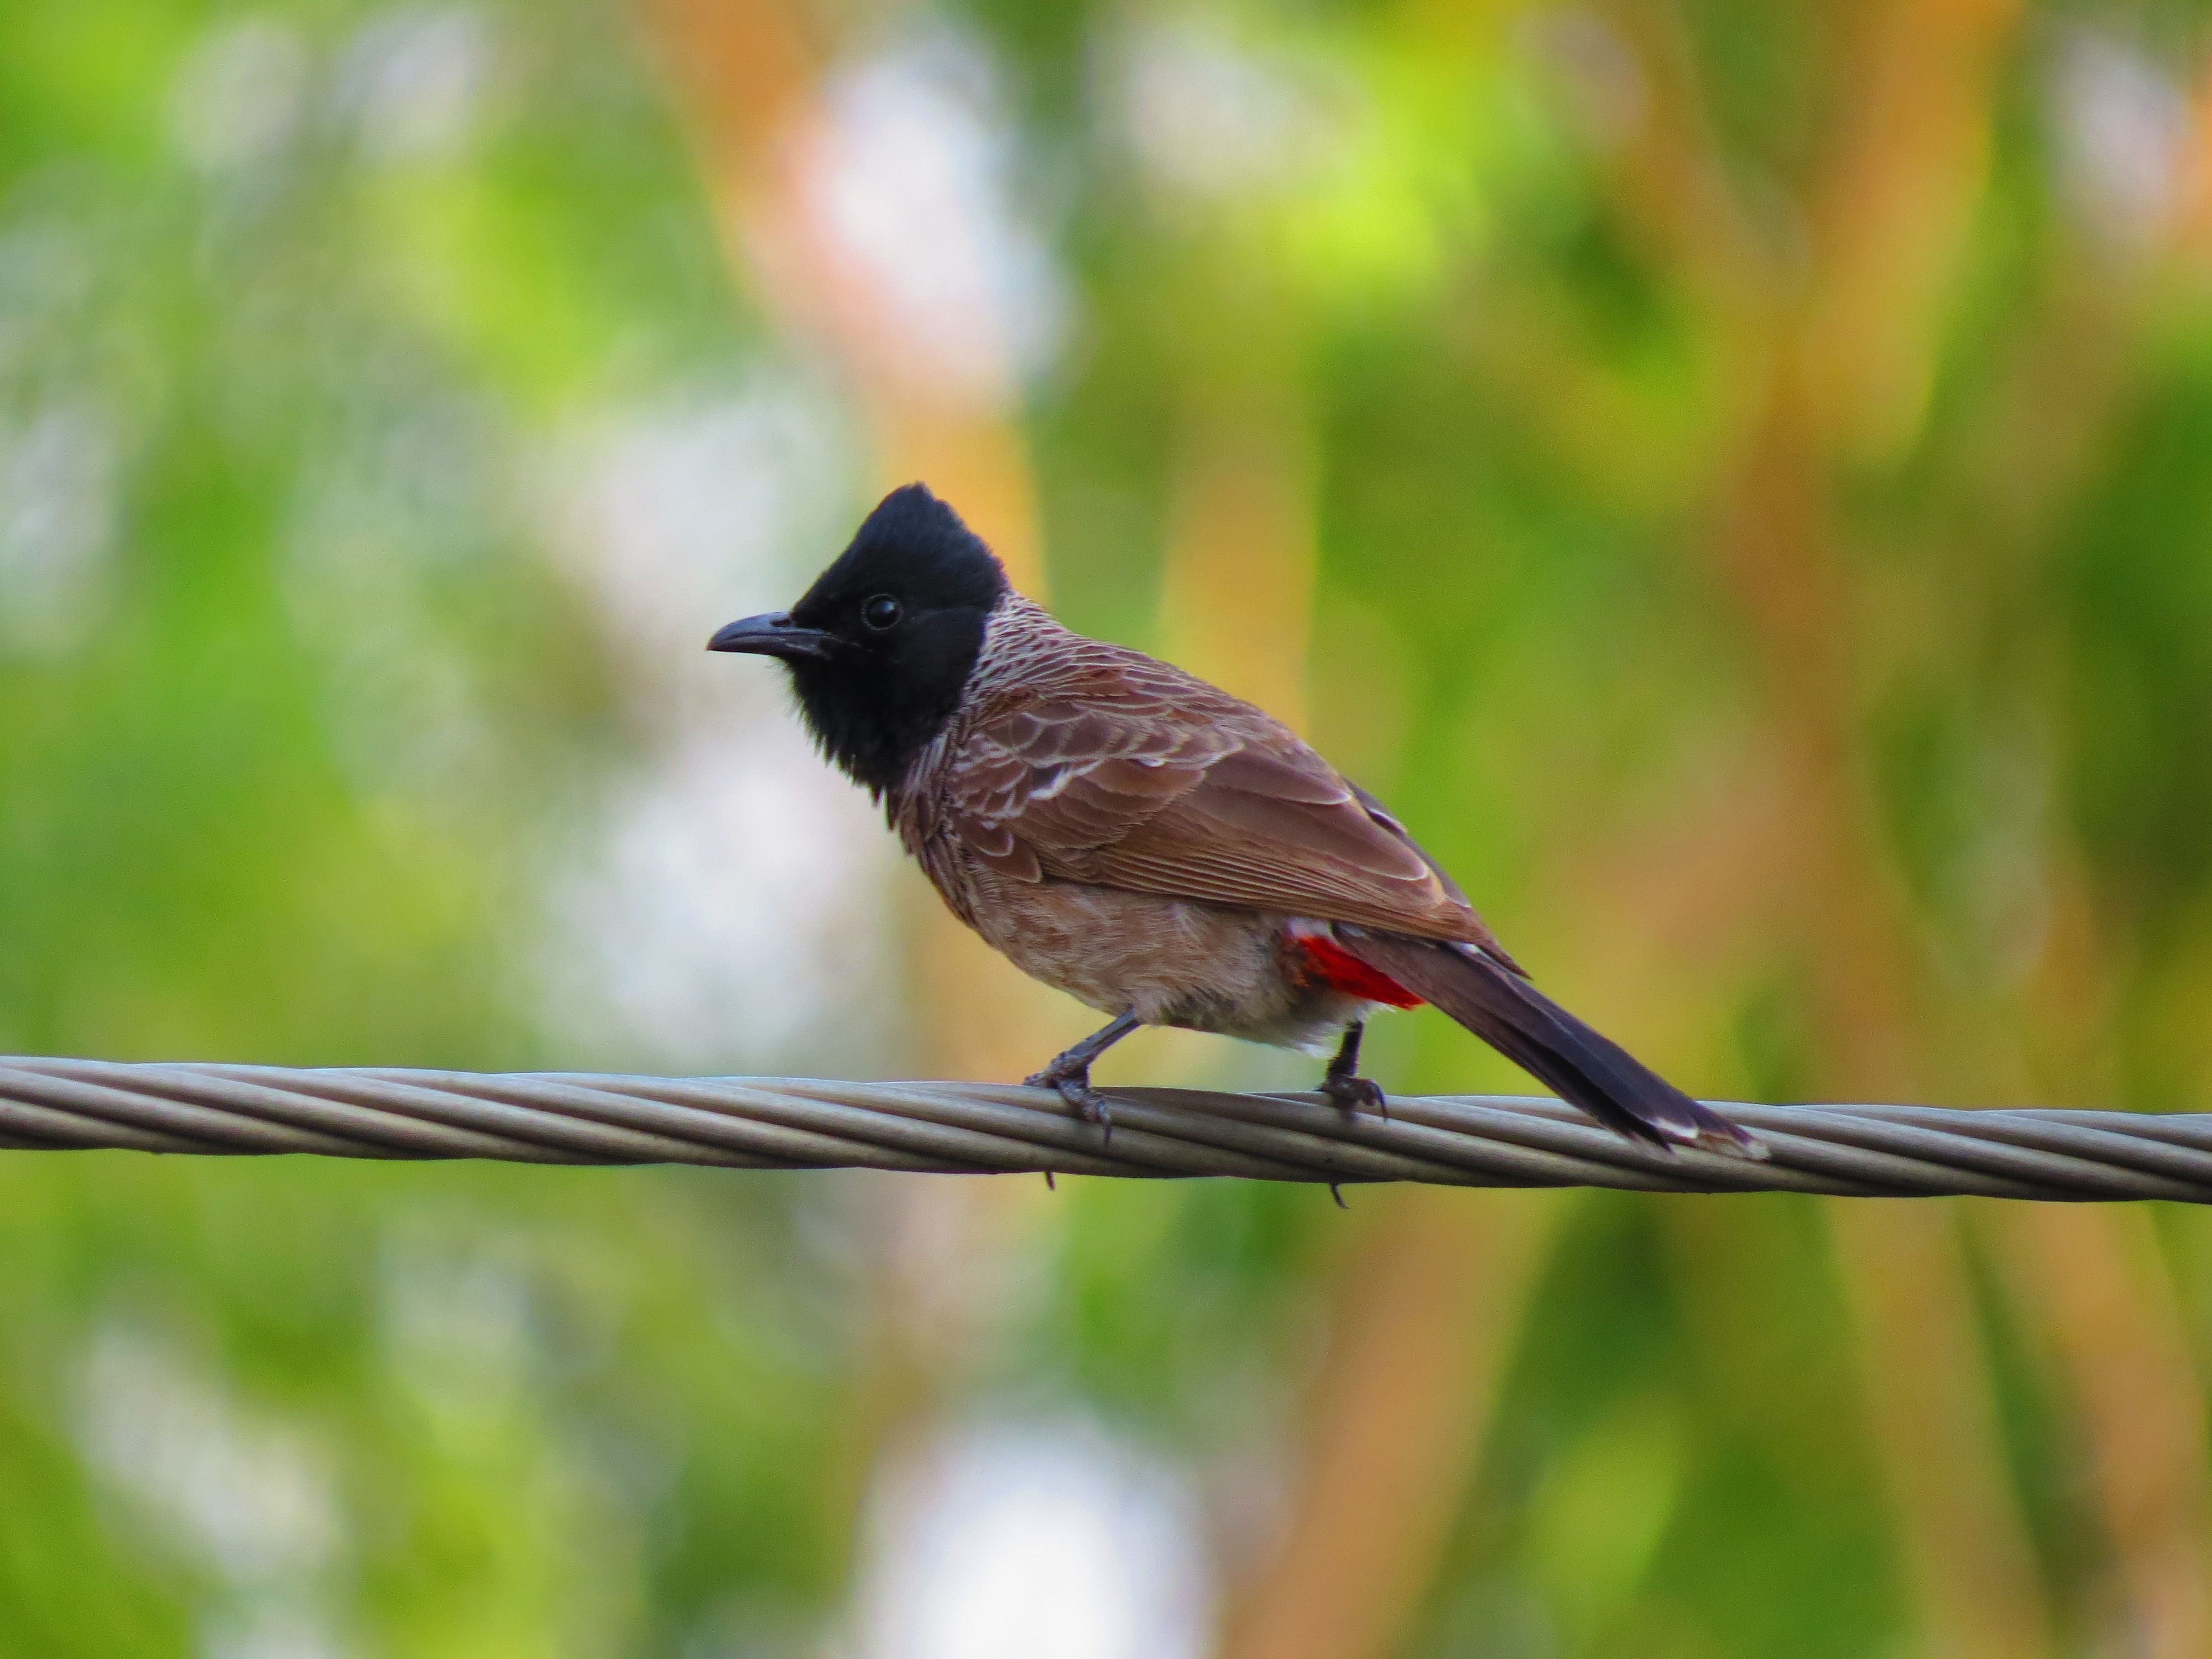 brown and black feathered bird